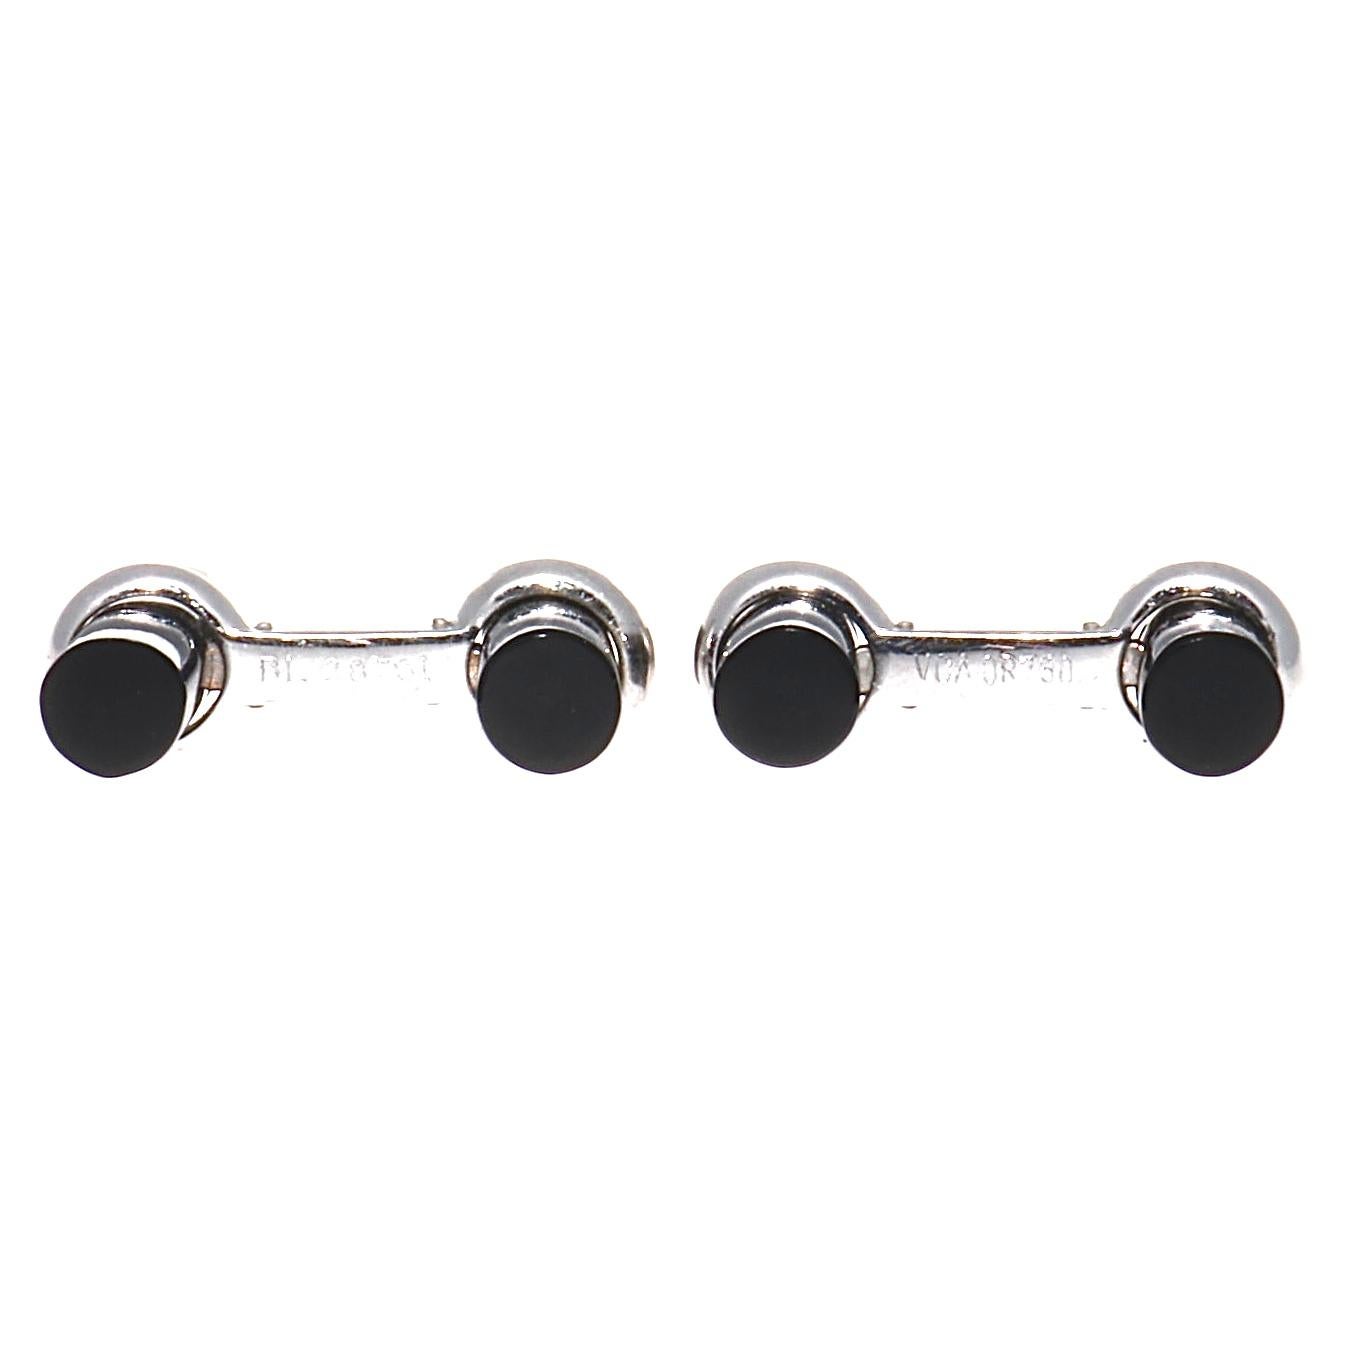 Contemporary Van Cleef & Arpels Interchangeable Rock Crystal and Onyx Gold Cufflinks